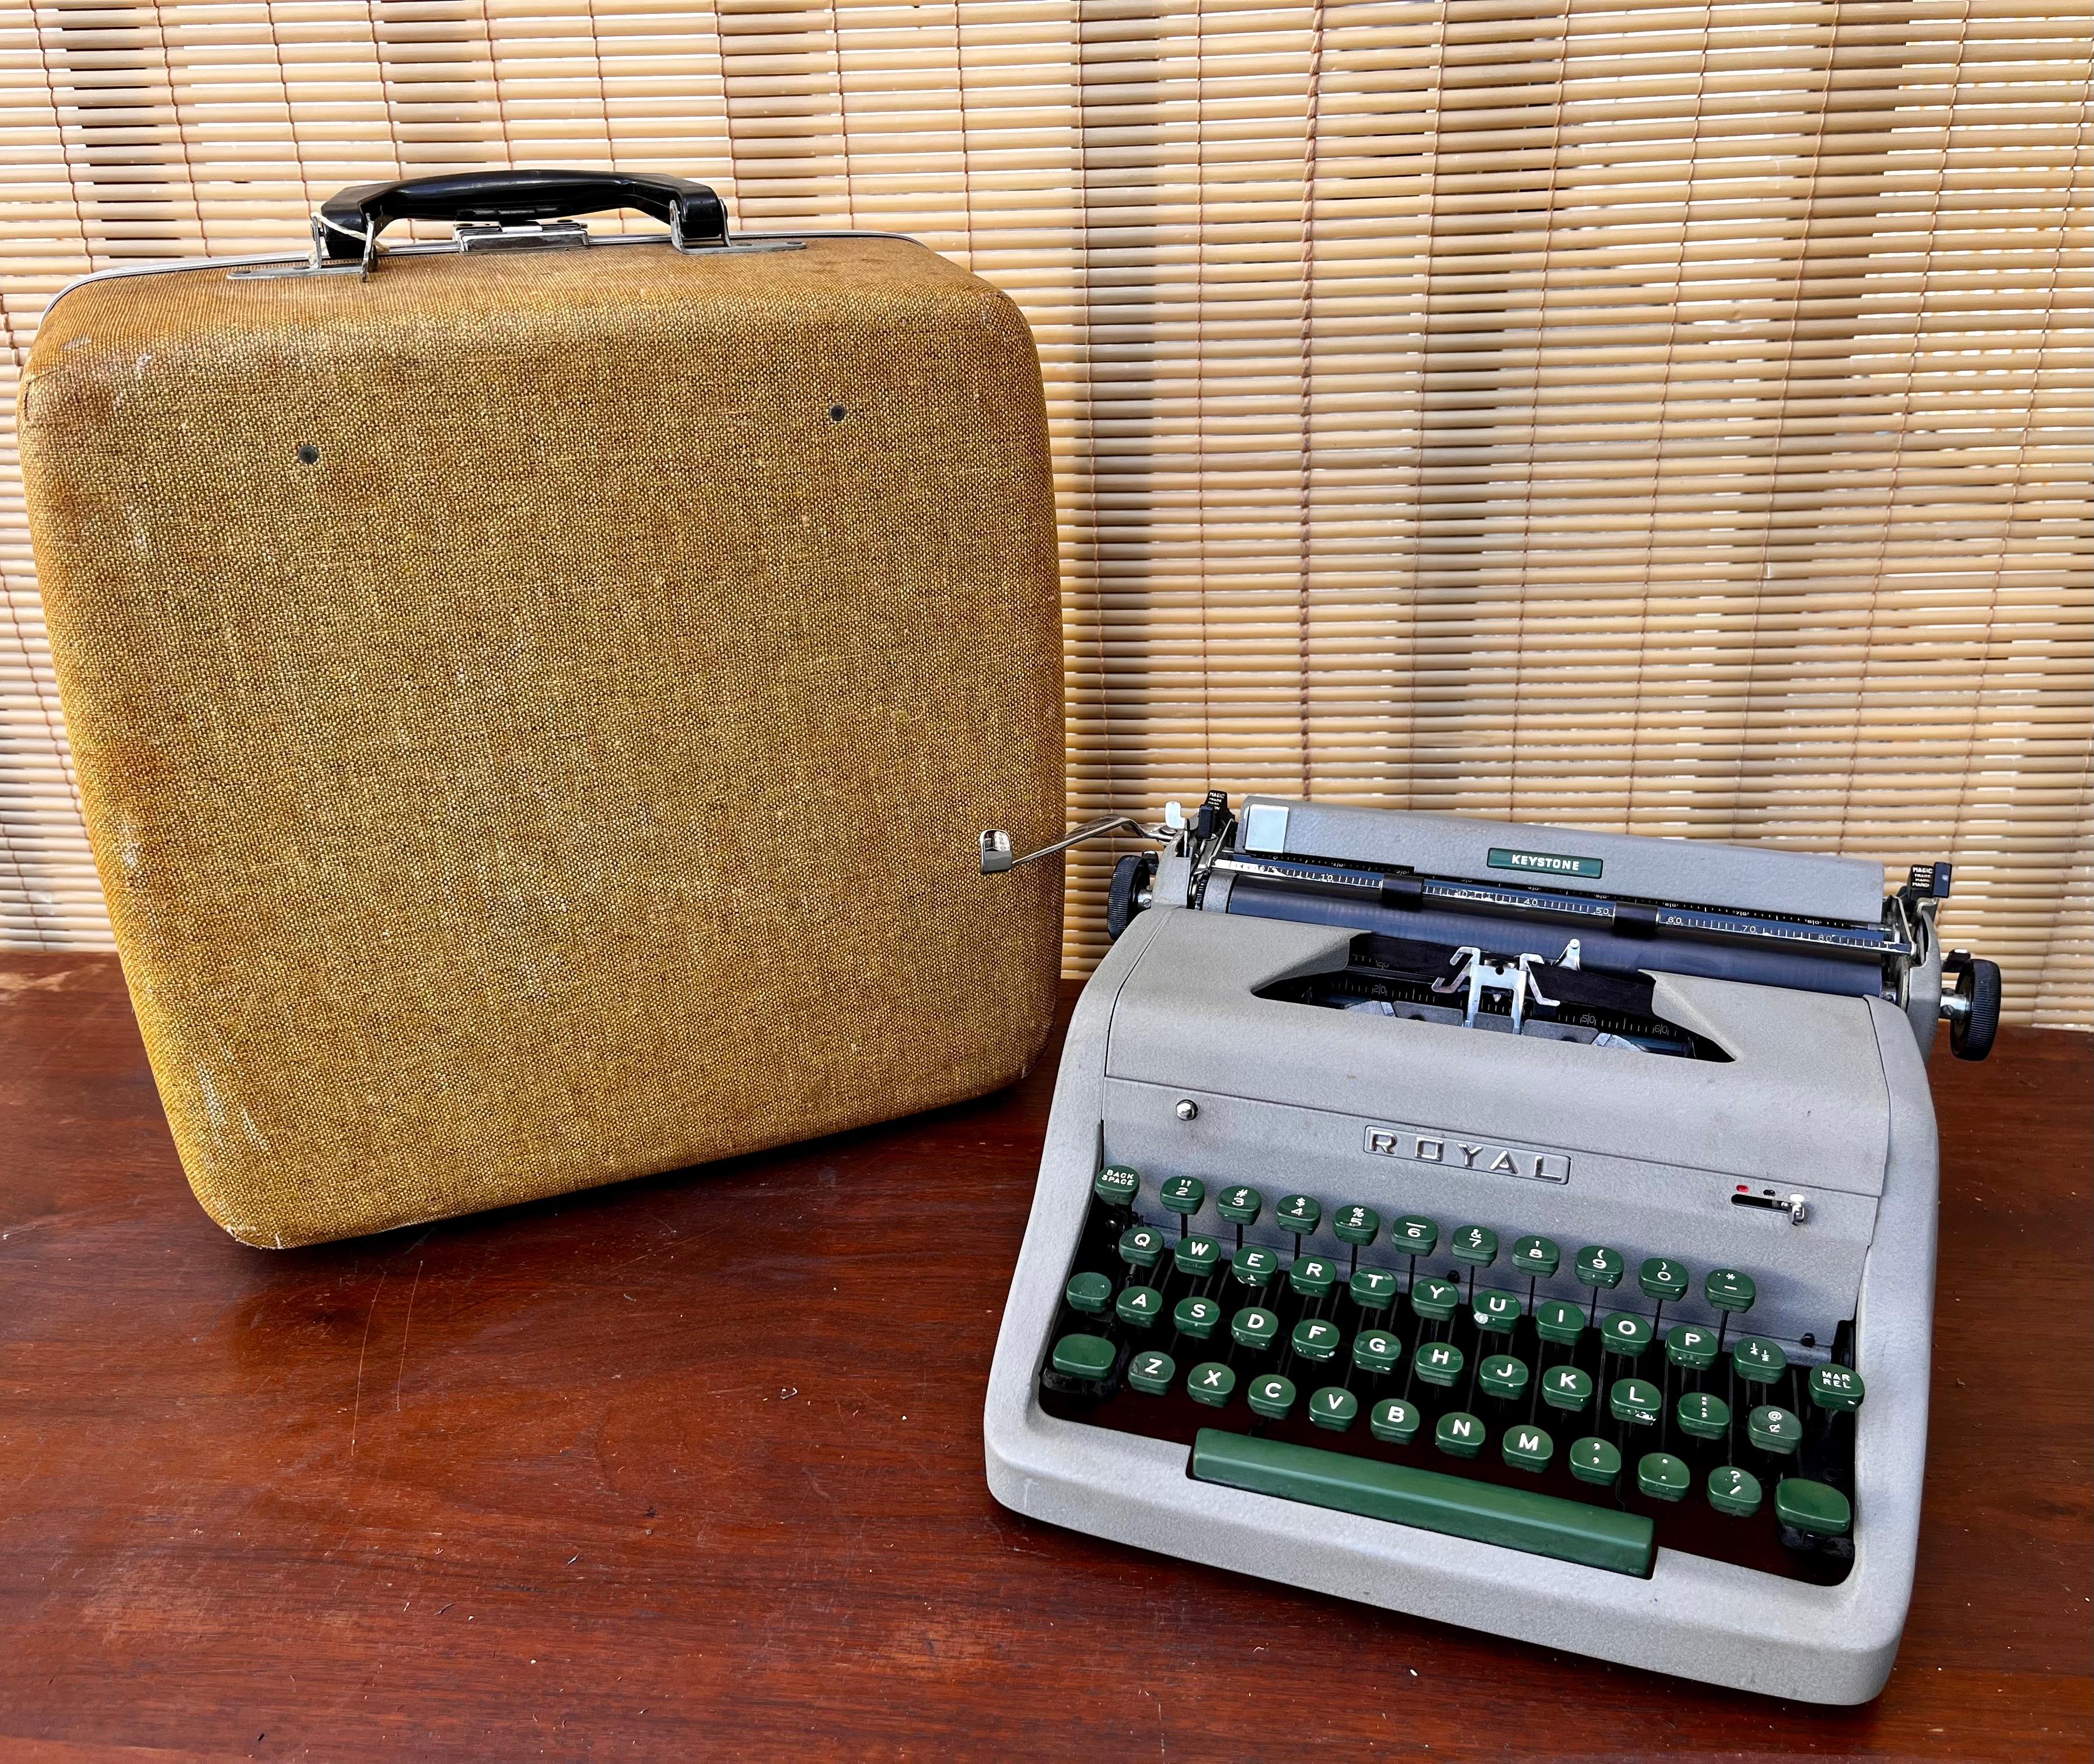 Vintage Mid-Century Modern Royal Keystone portable typewriter with original case. circa 1950s. 
Features a Qwerty keyboard, a gray color body green keys, and the original case with the original lock key.
In excellent original cosmetic and working